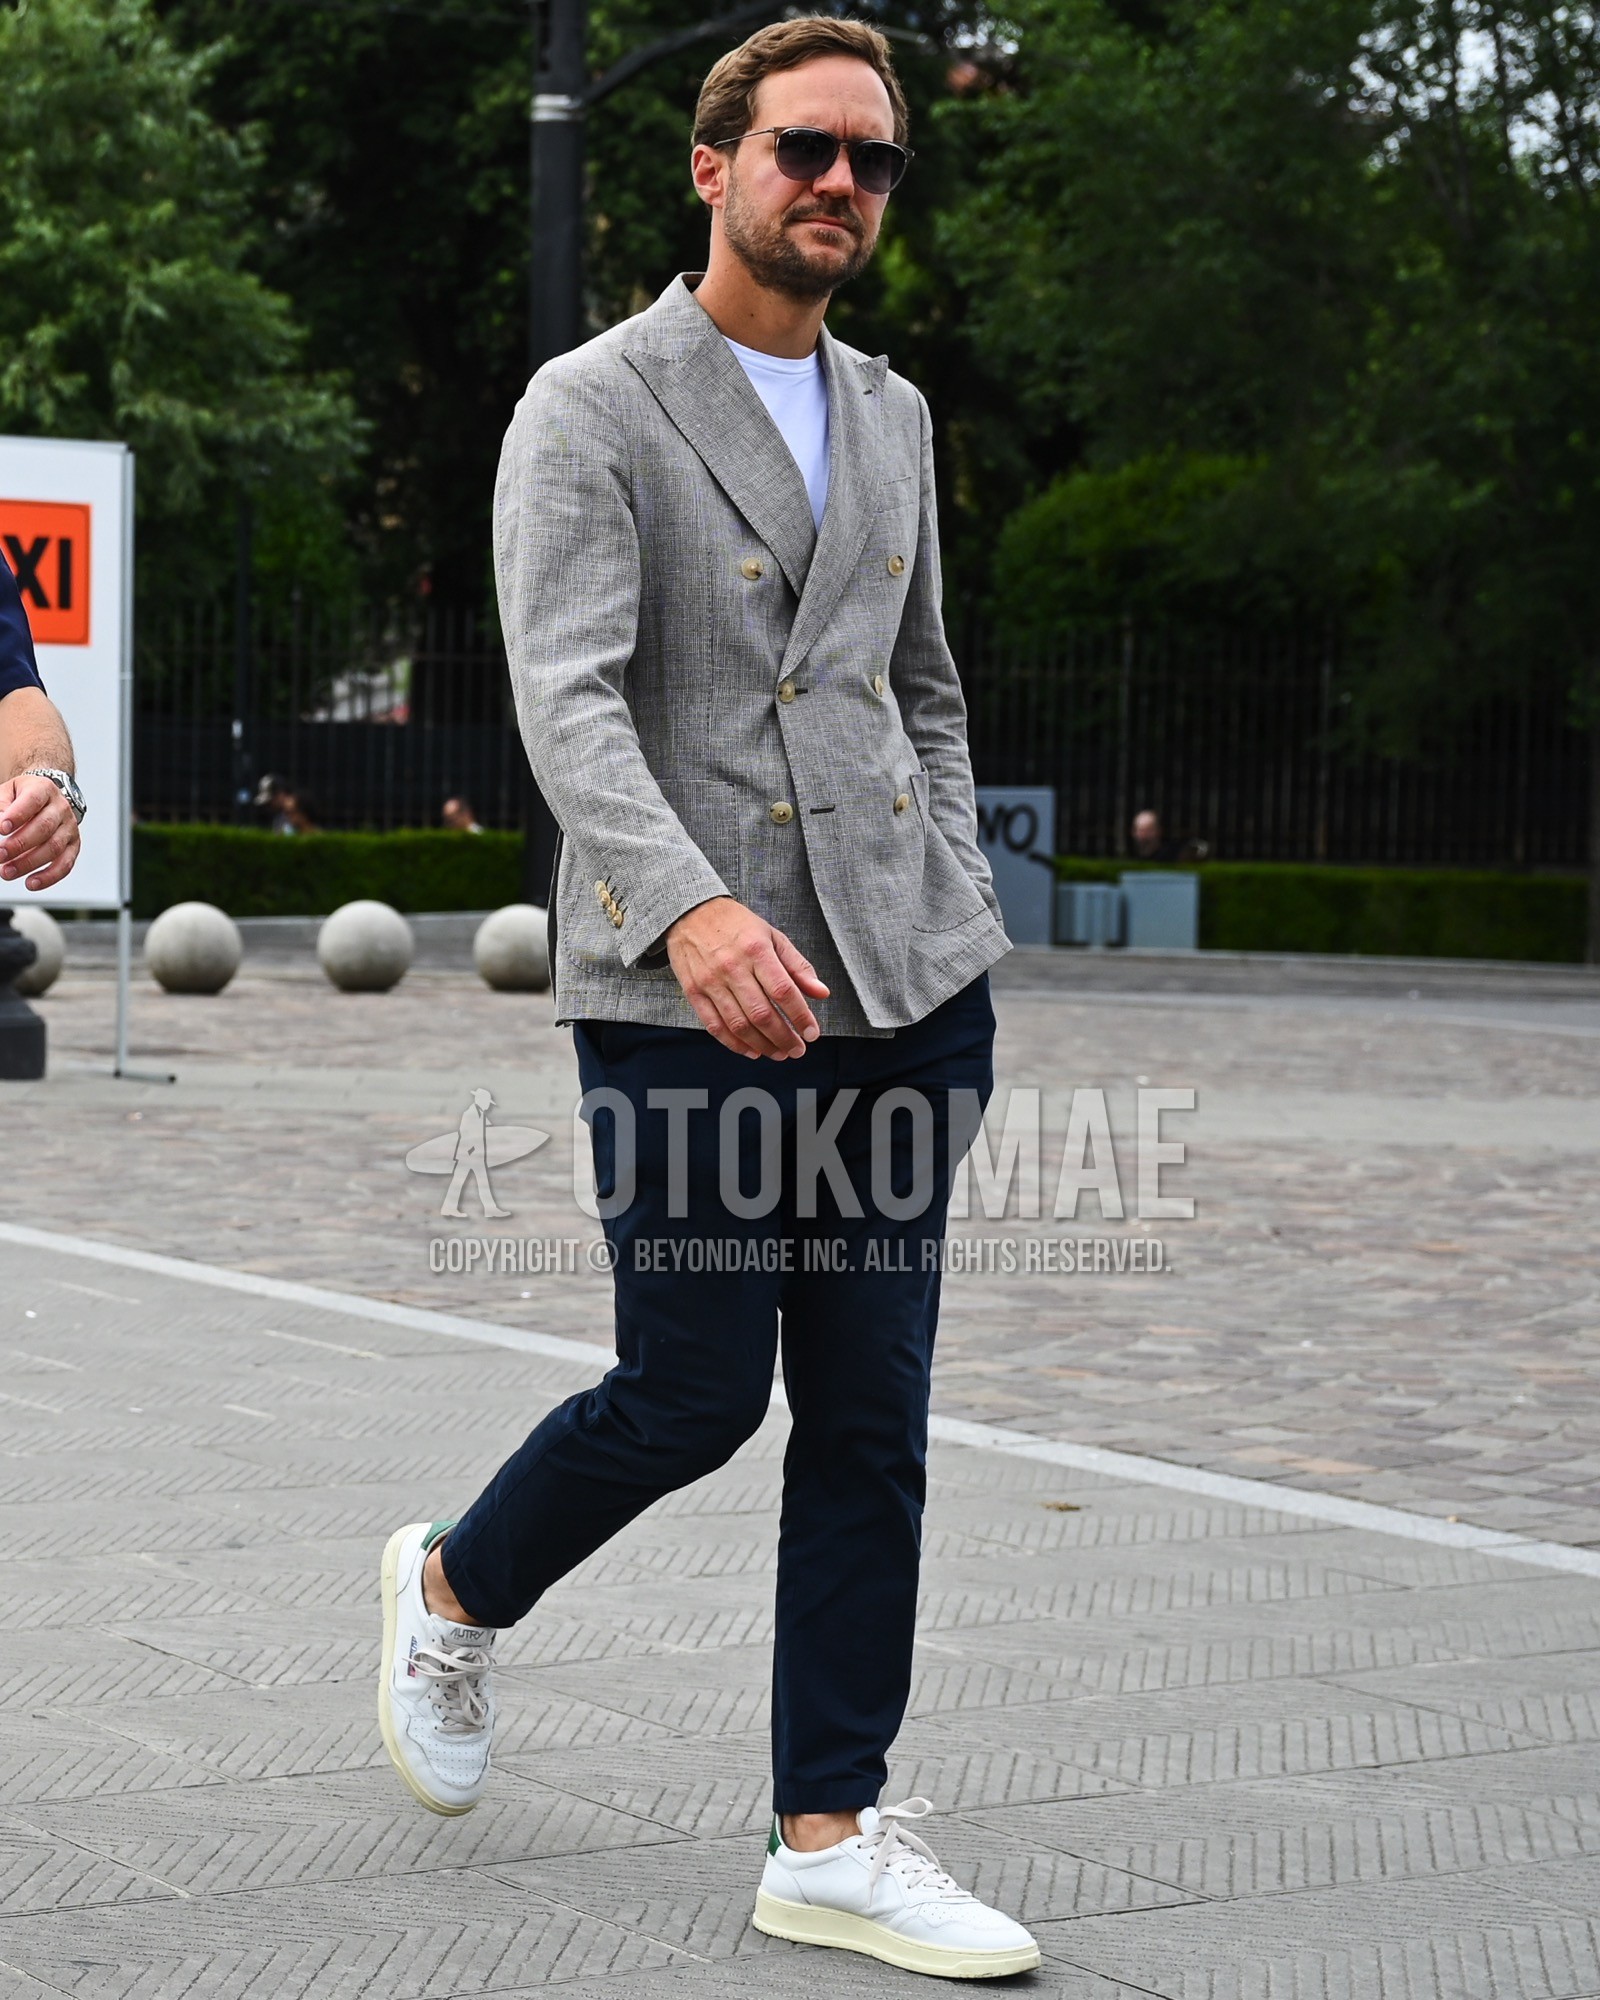 Men's spring summer autumn outfit with black plain sunglasses, gray plain tailored jacket, white plain t-shirt, navy plain chinos, white low-cut sneakers.